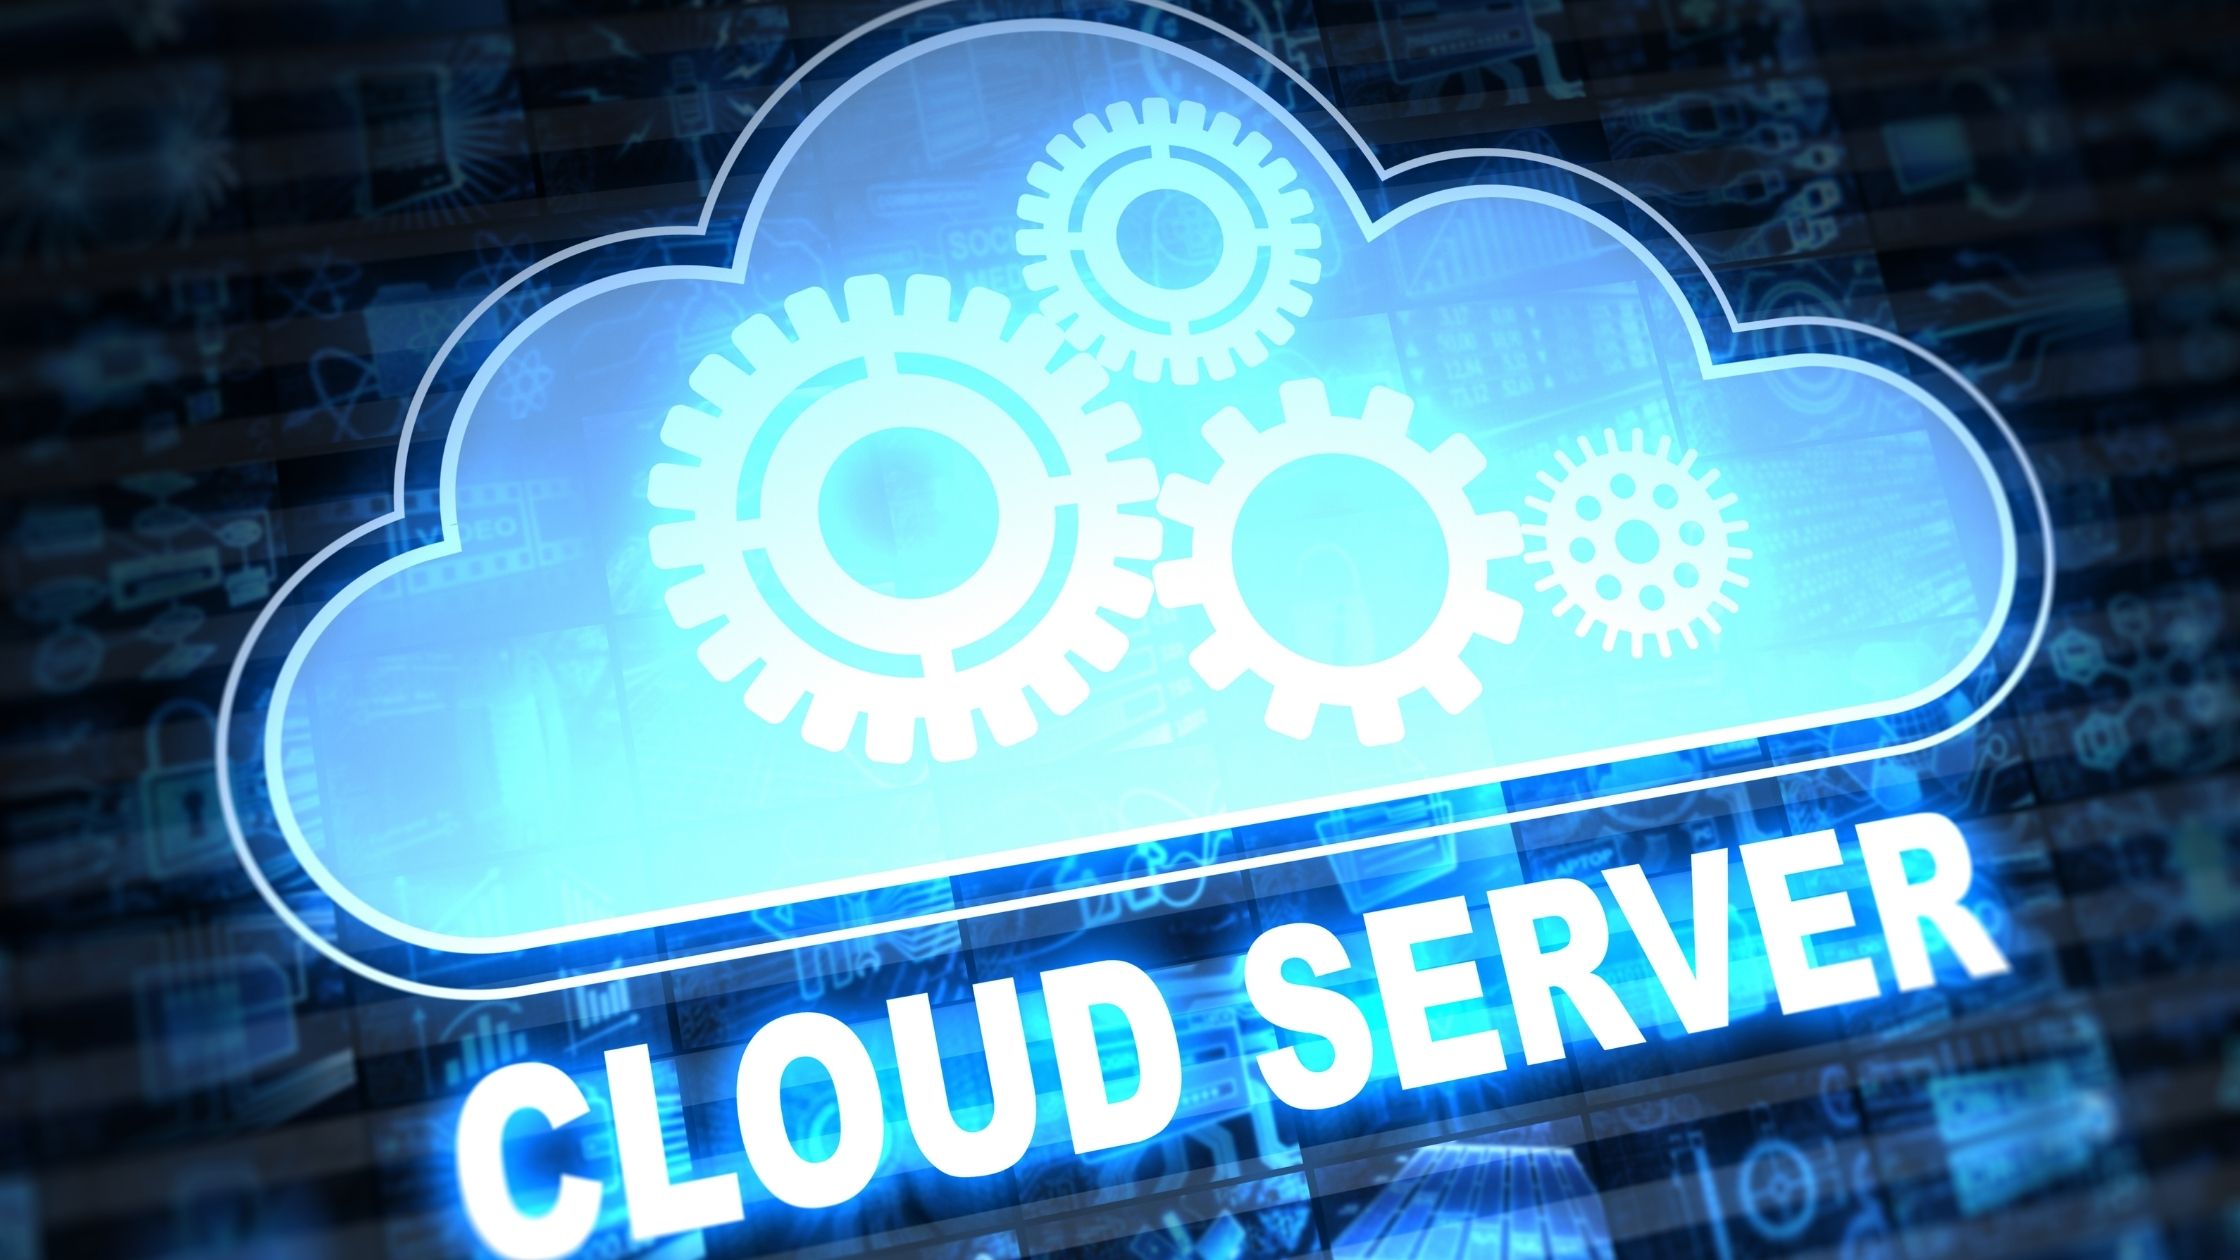 New Online Businesses Should Go for VPS Cloud Hosting Service to Run